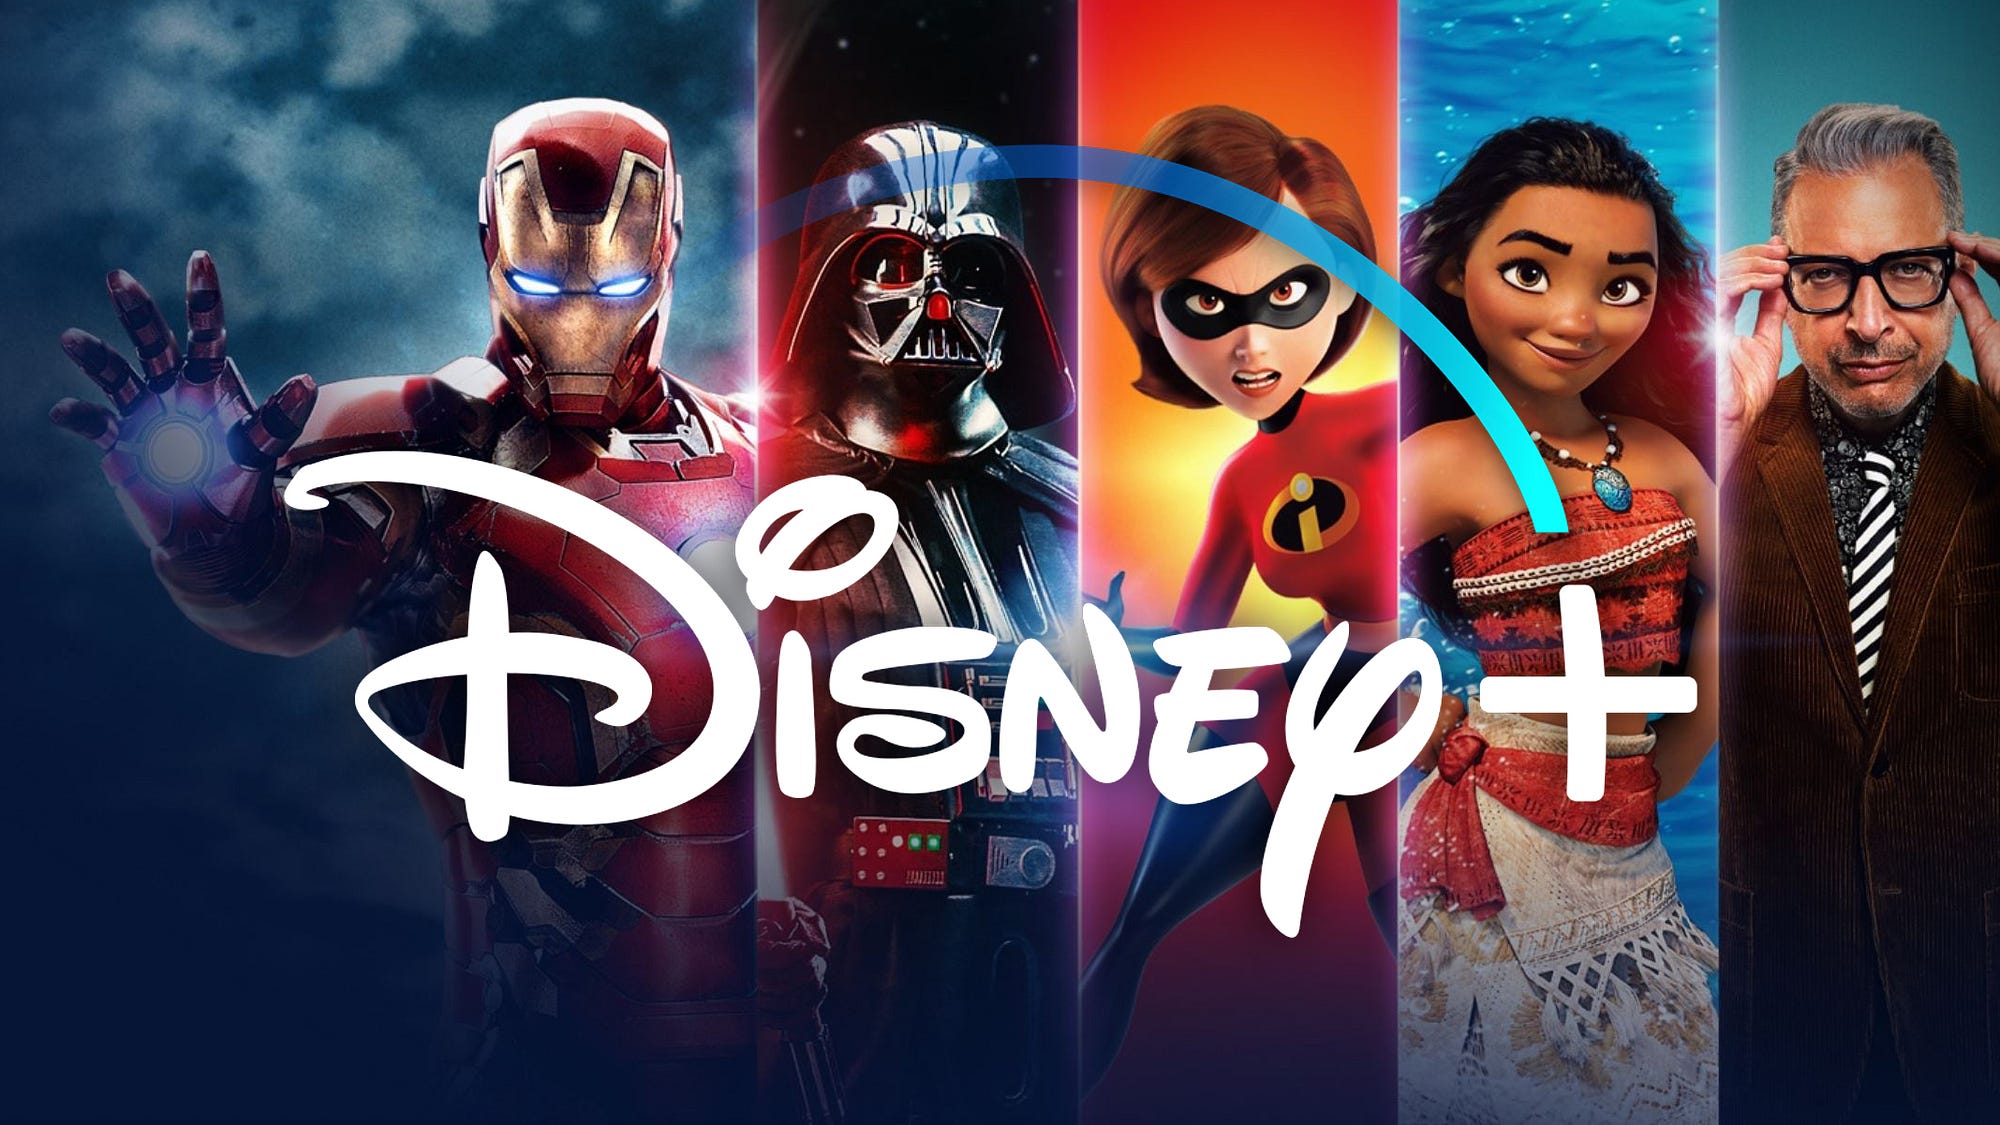 5 UX improvements for Disney+ both on Mobile and Smart TV apps | by Tan  Thye Chuan | Bootcamp